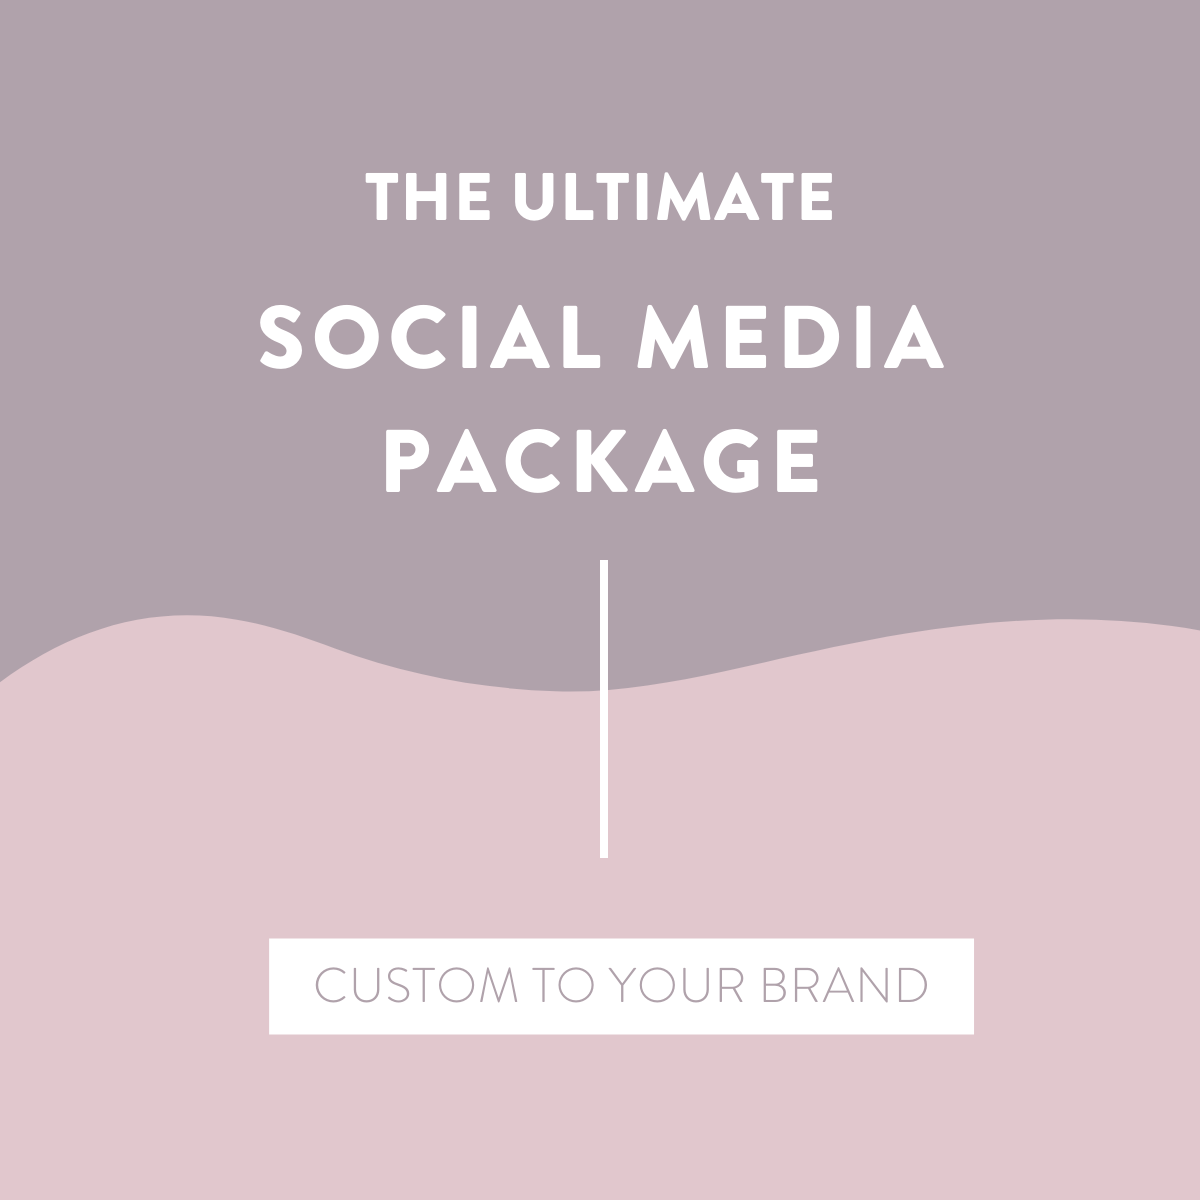 The Ultimate Social Media Package